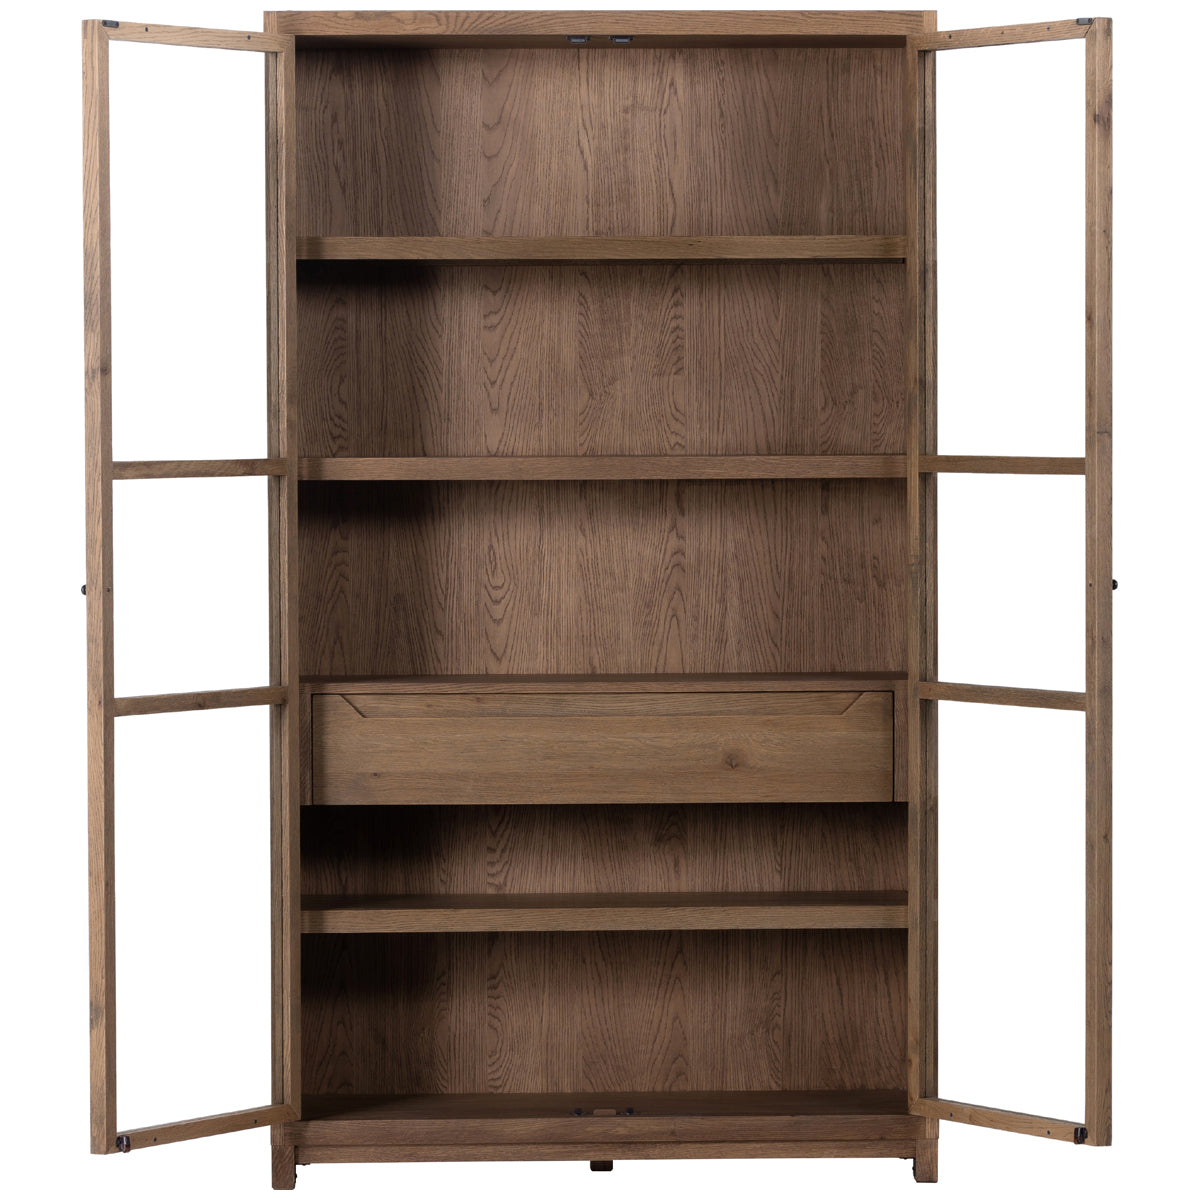 Four Hands Irondale Millie Cabinet - Drifted Oak